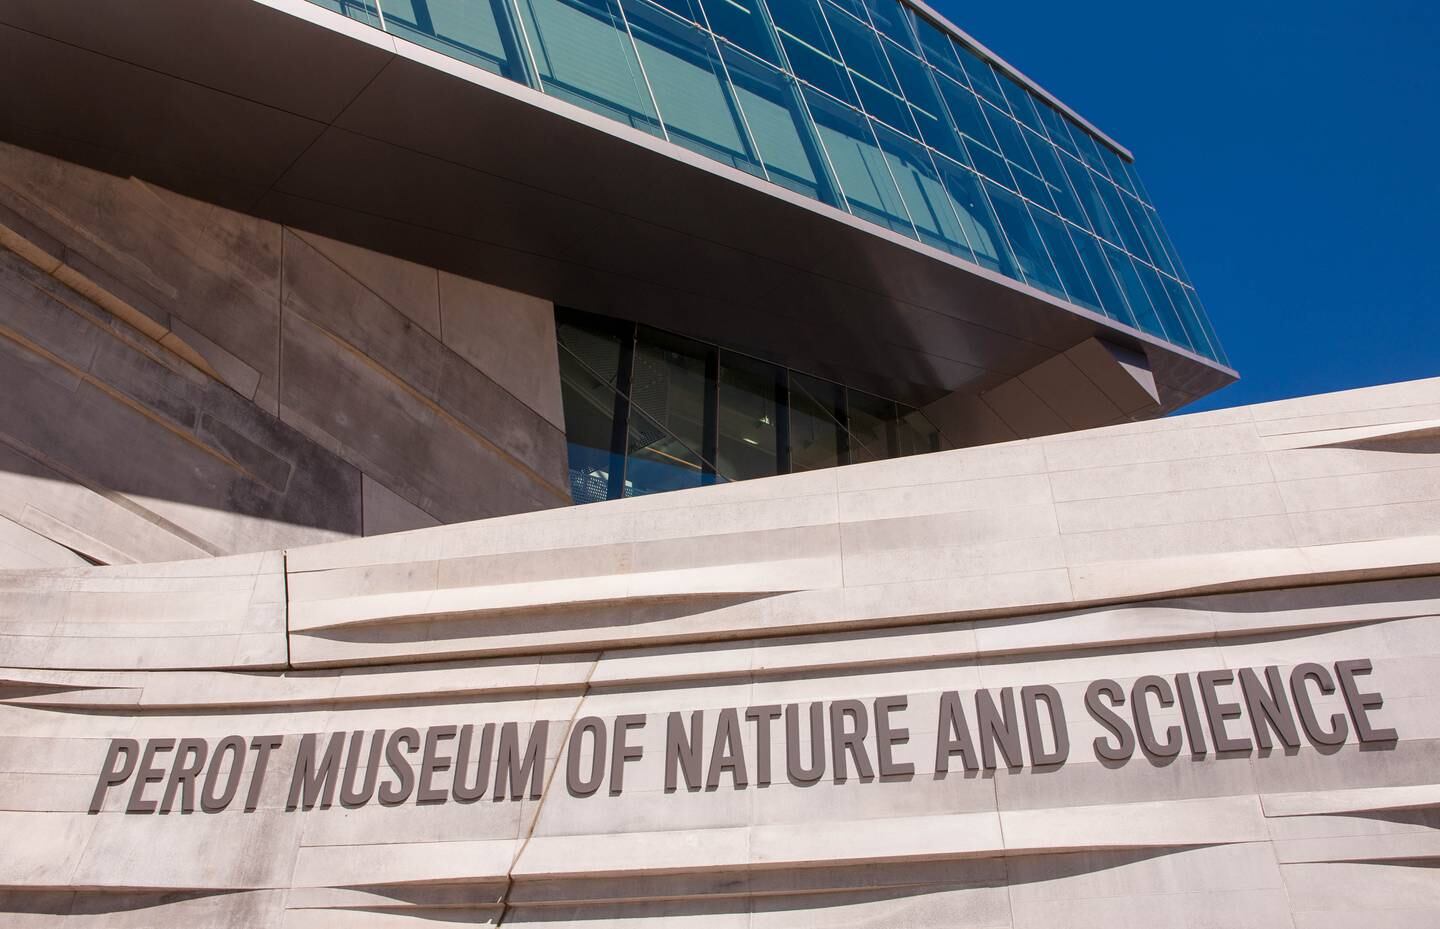 Perot Museum of Nature and Science in Dallas, Texas. Getty Images